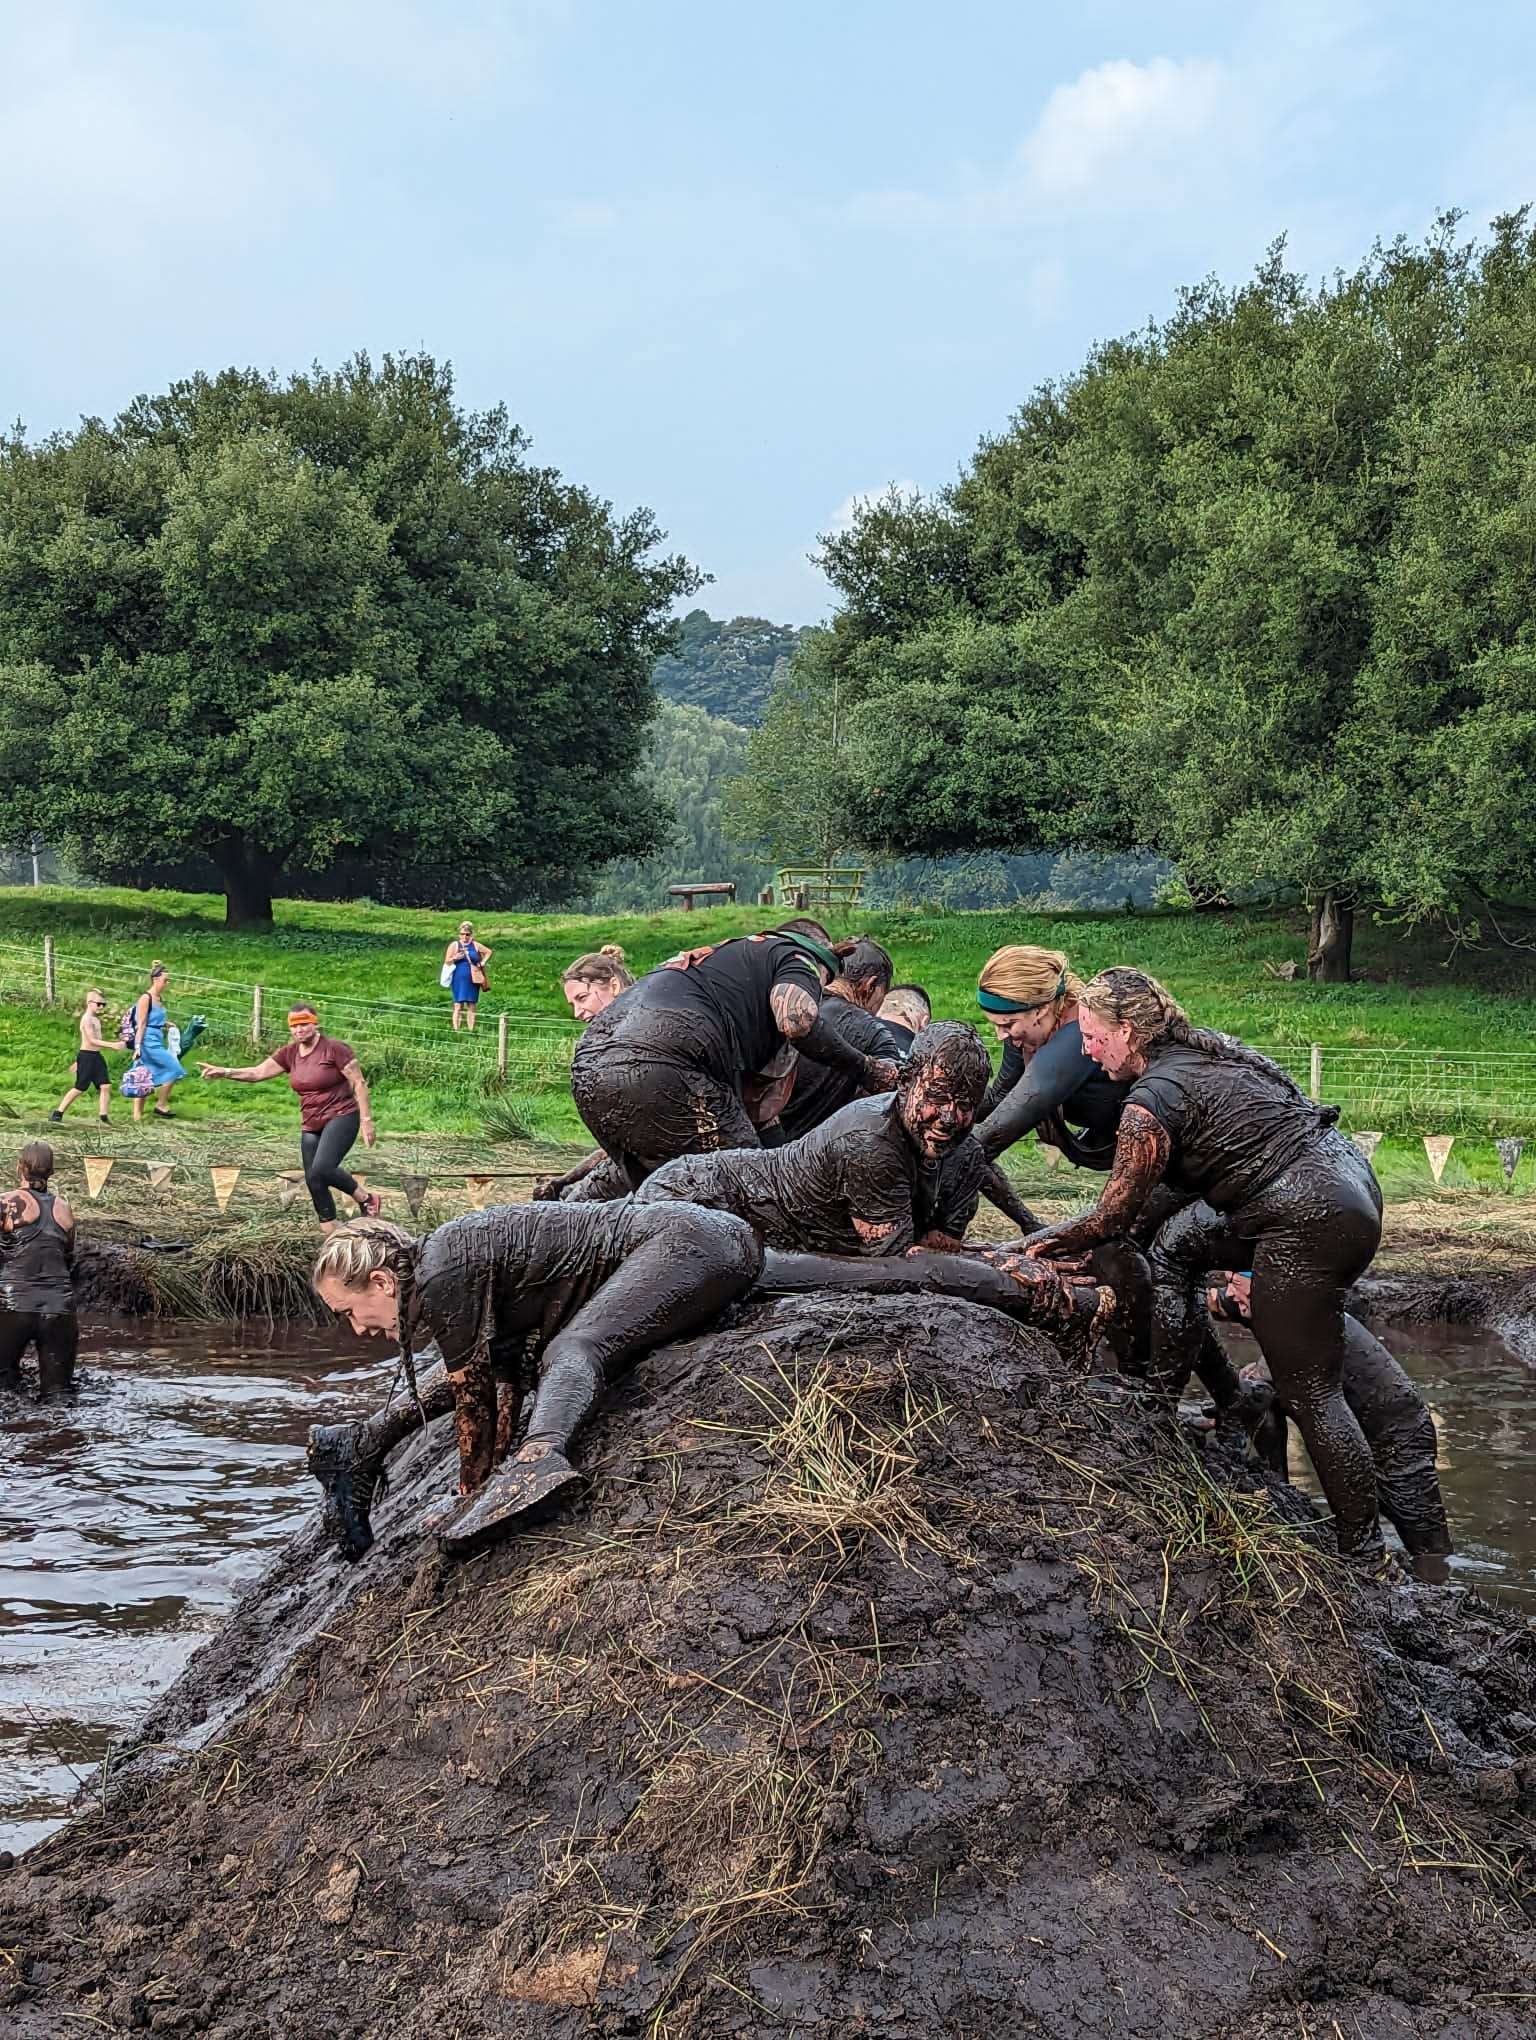 A group of Darwin Group employees tackling a very muddy obstacle as part of the Tough Mudder challenge. They are all soaking wet and covered in mud as they scramble over a mud bank with pools of water either side.